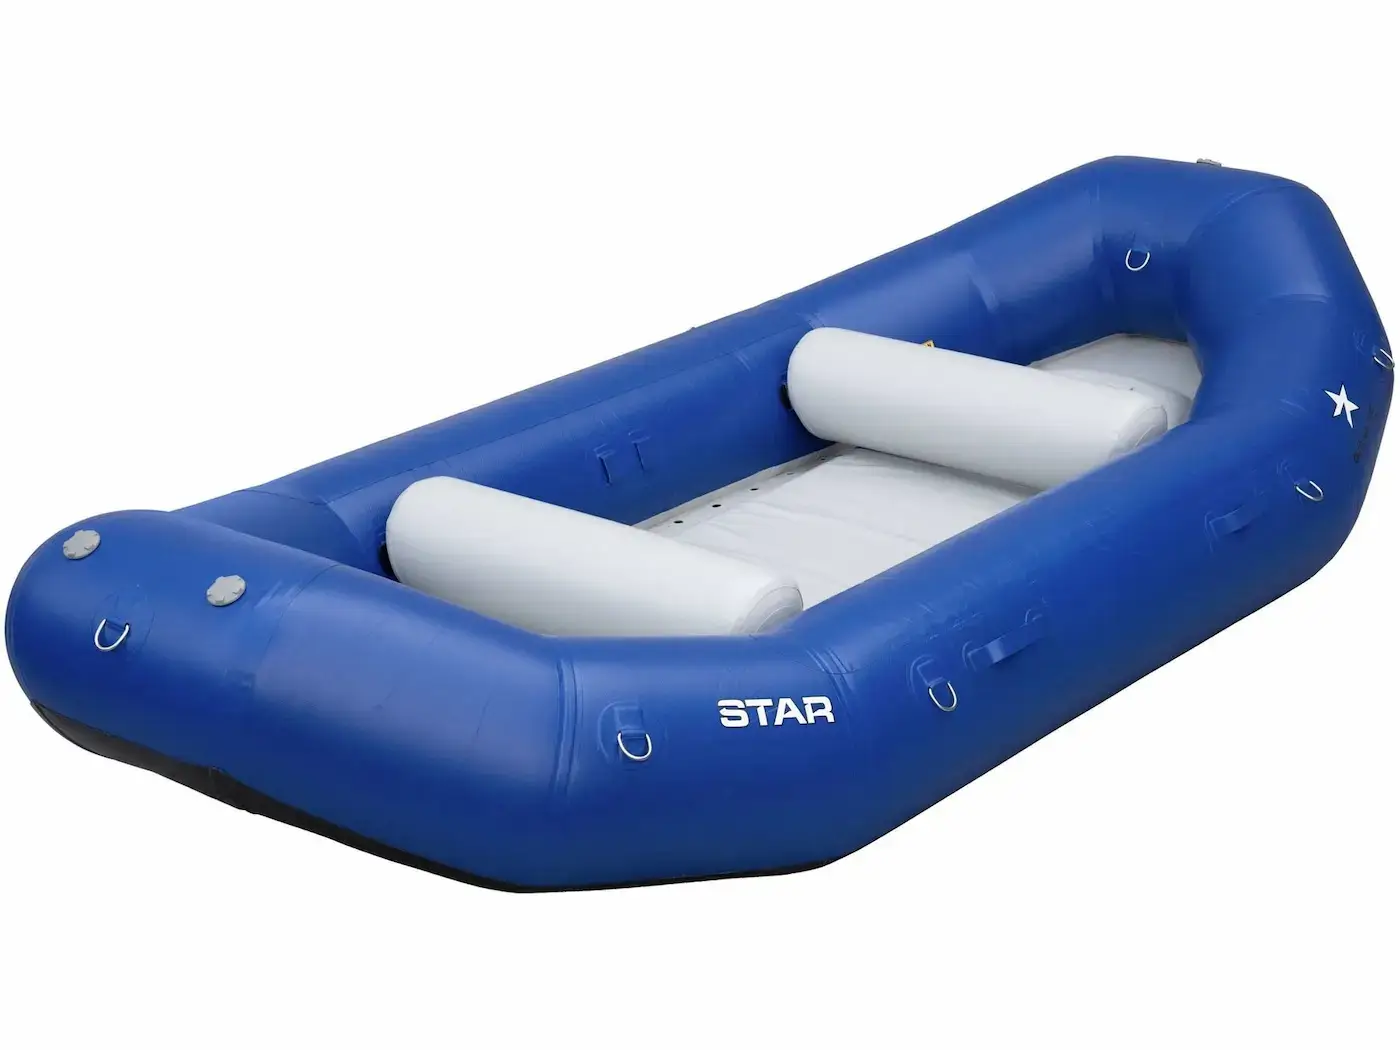 Hypalon vs PVC Raft: What's the Difference?